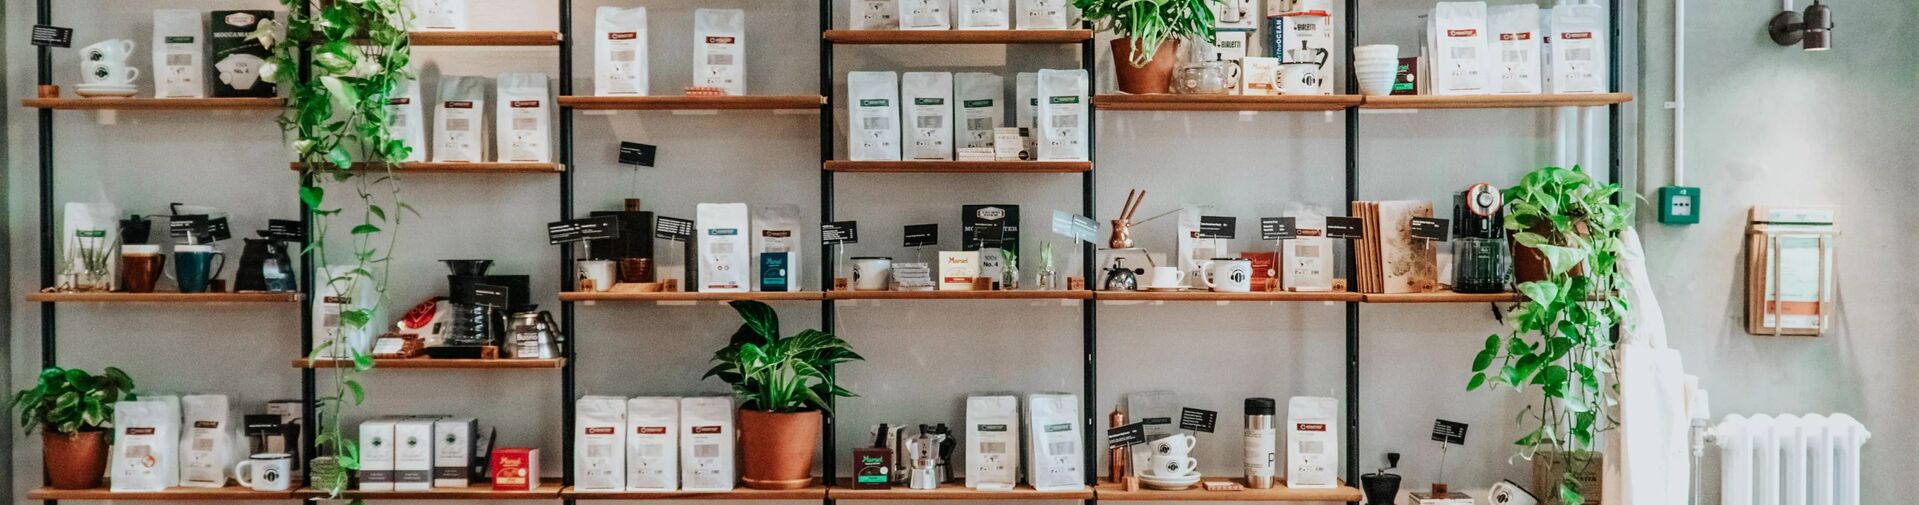 Shelves with coffee bags and plants